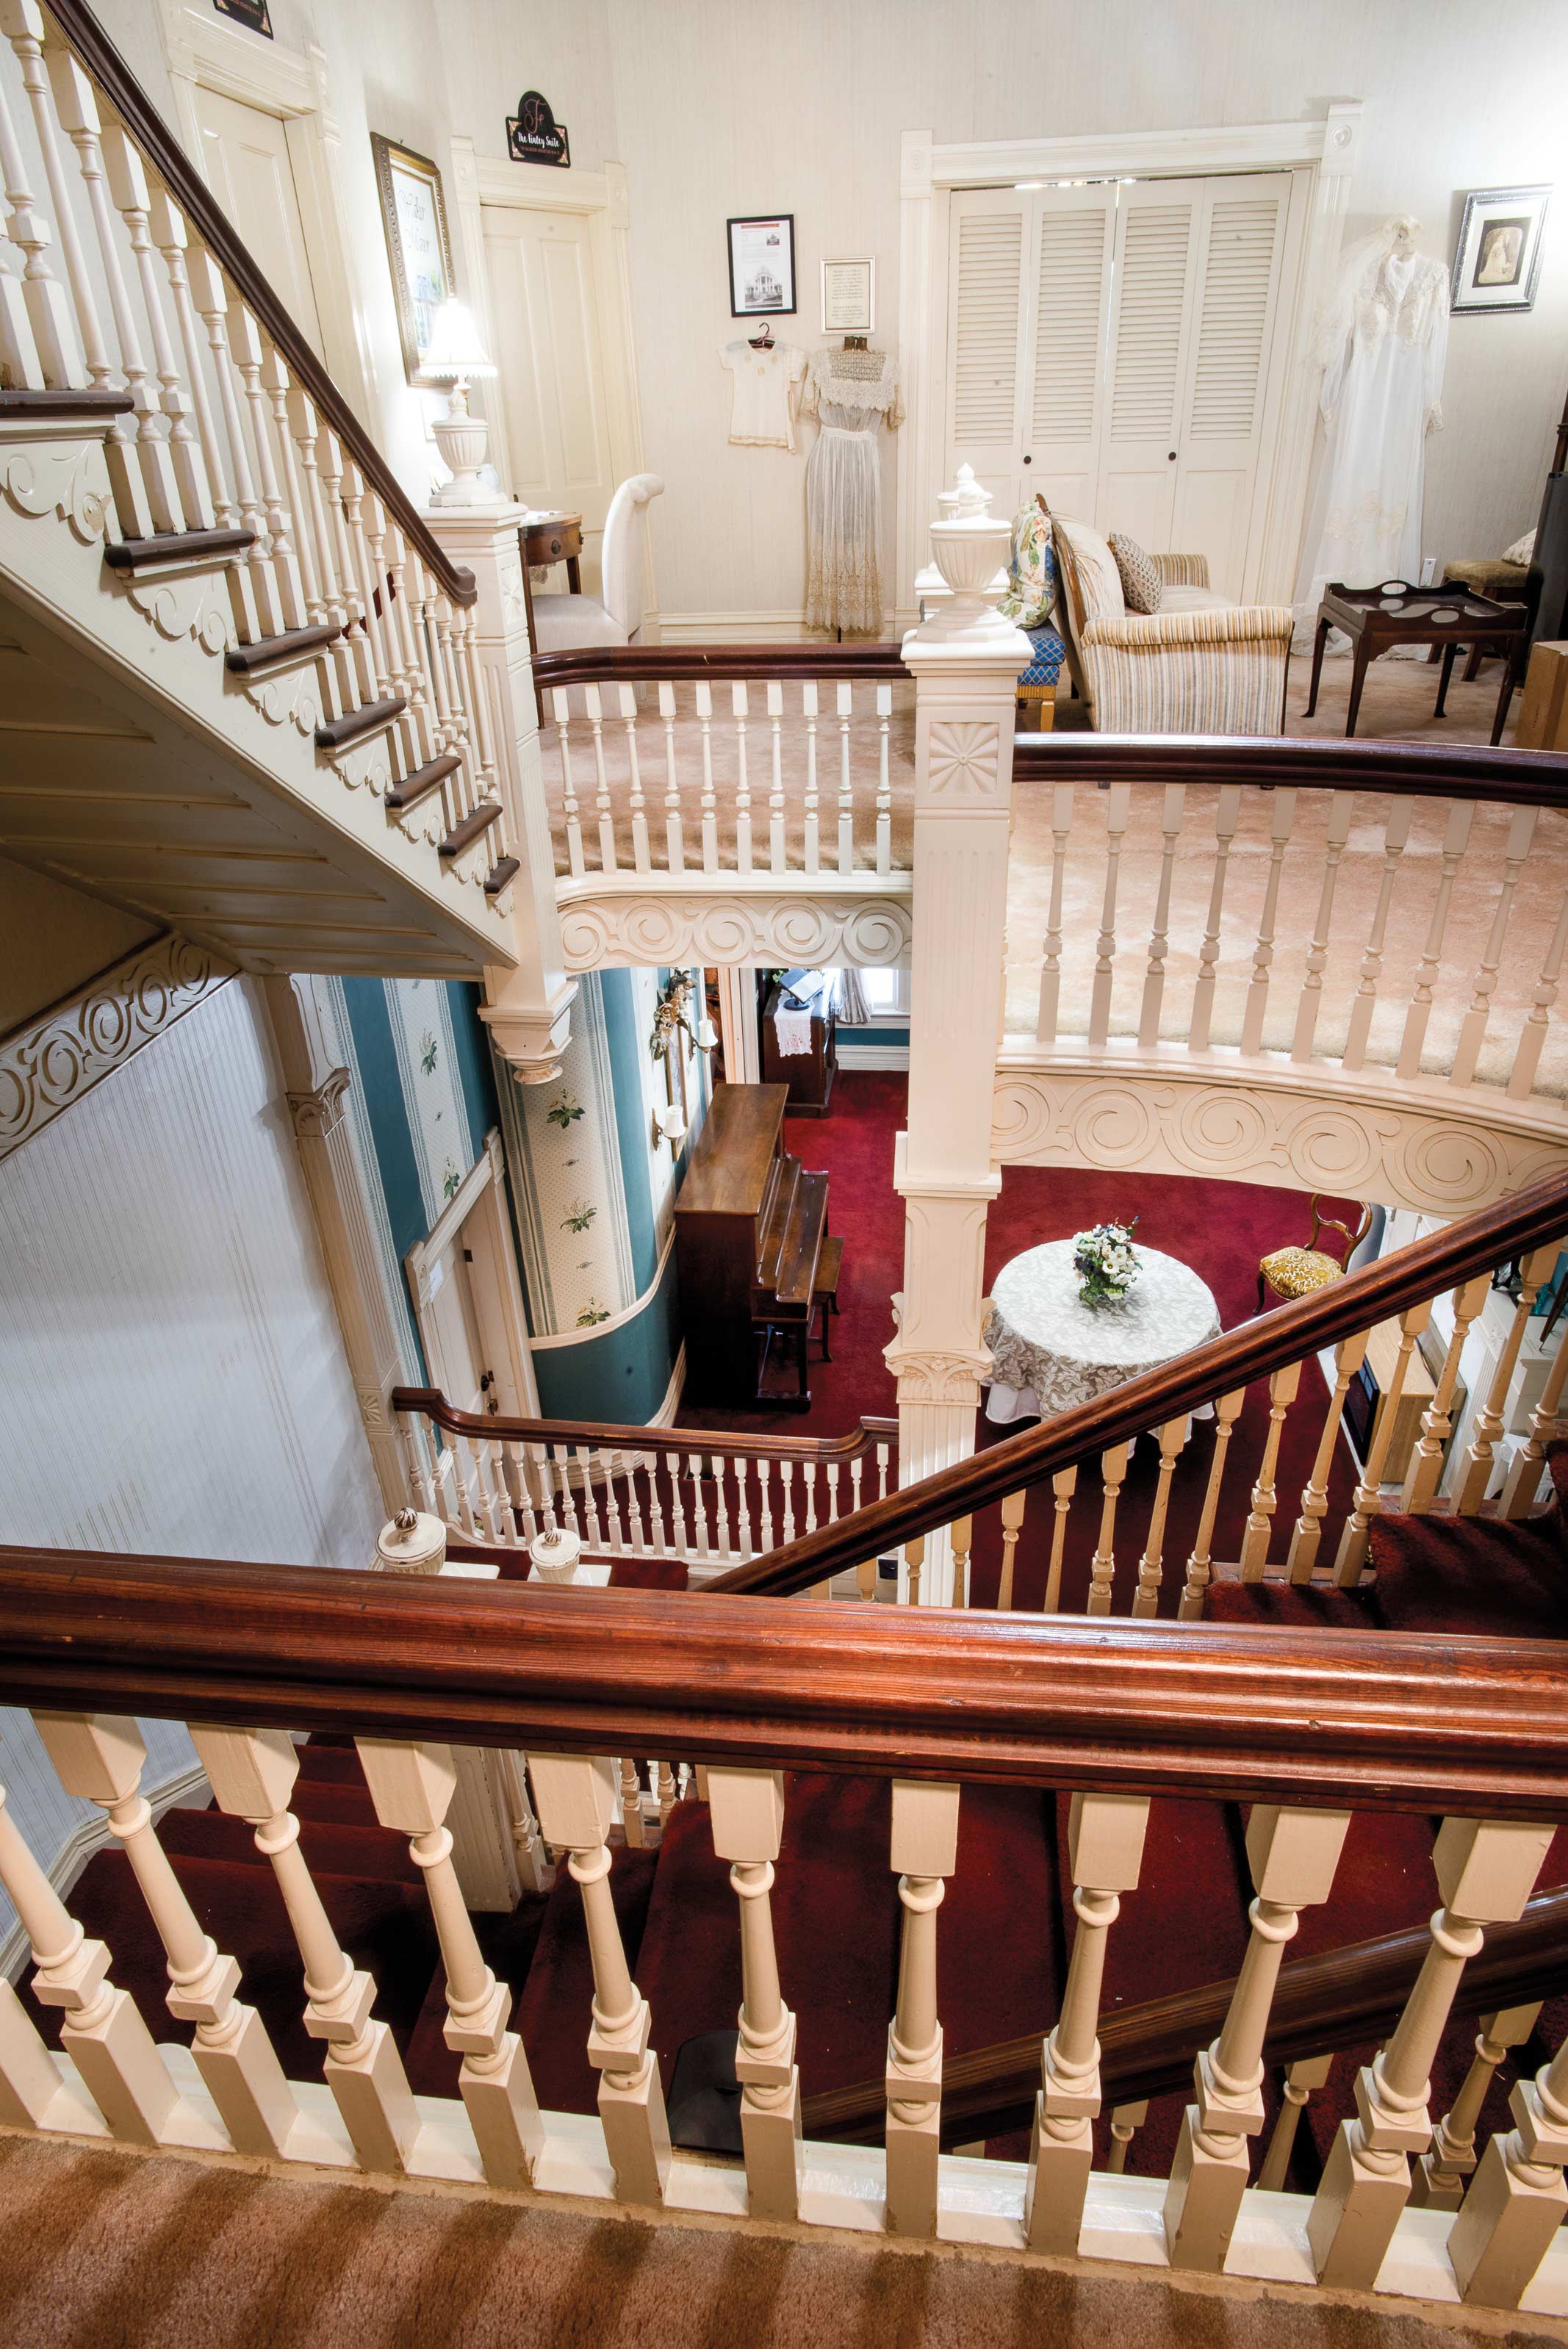 The staircase inside Walker Manor